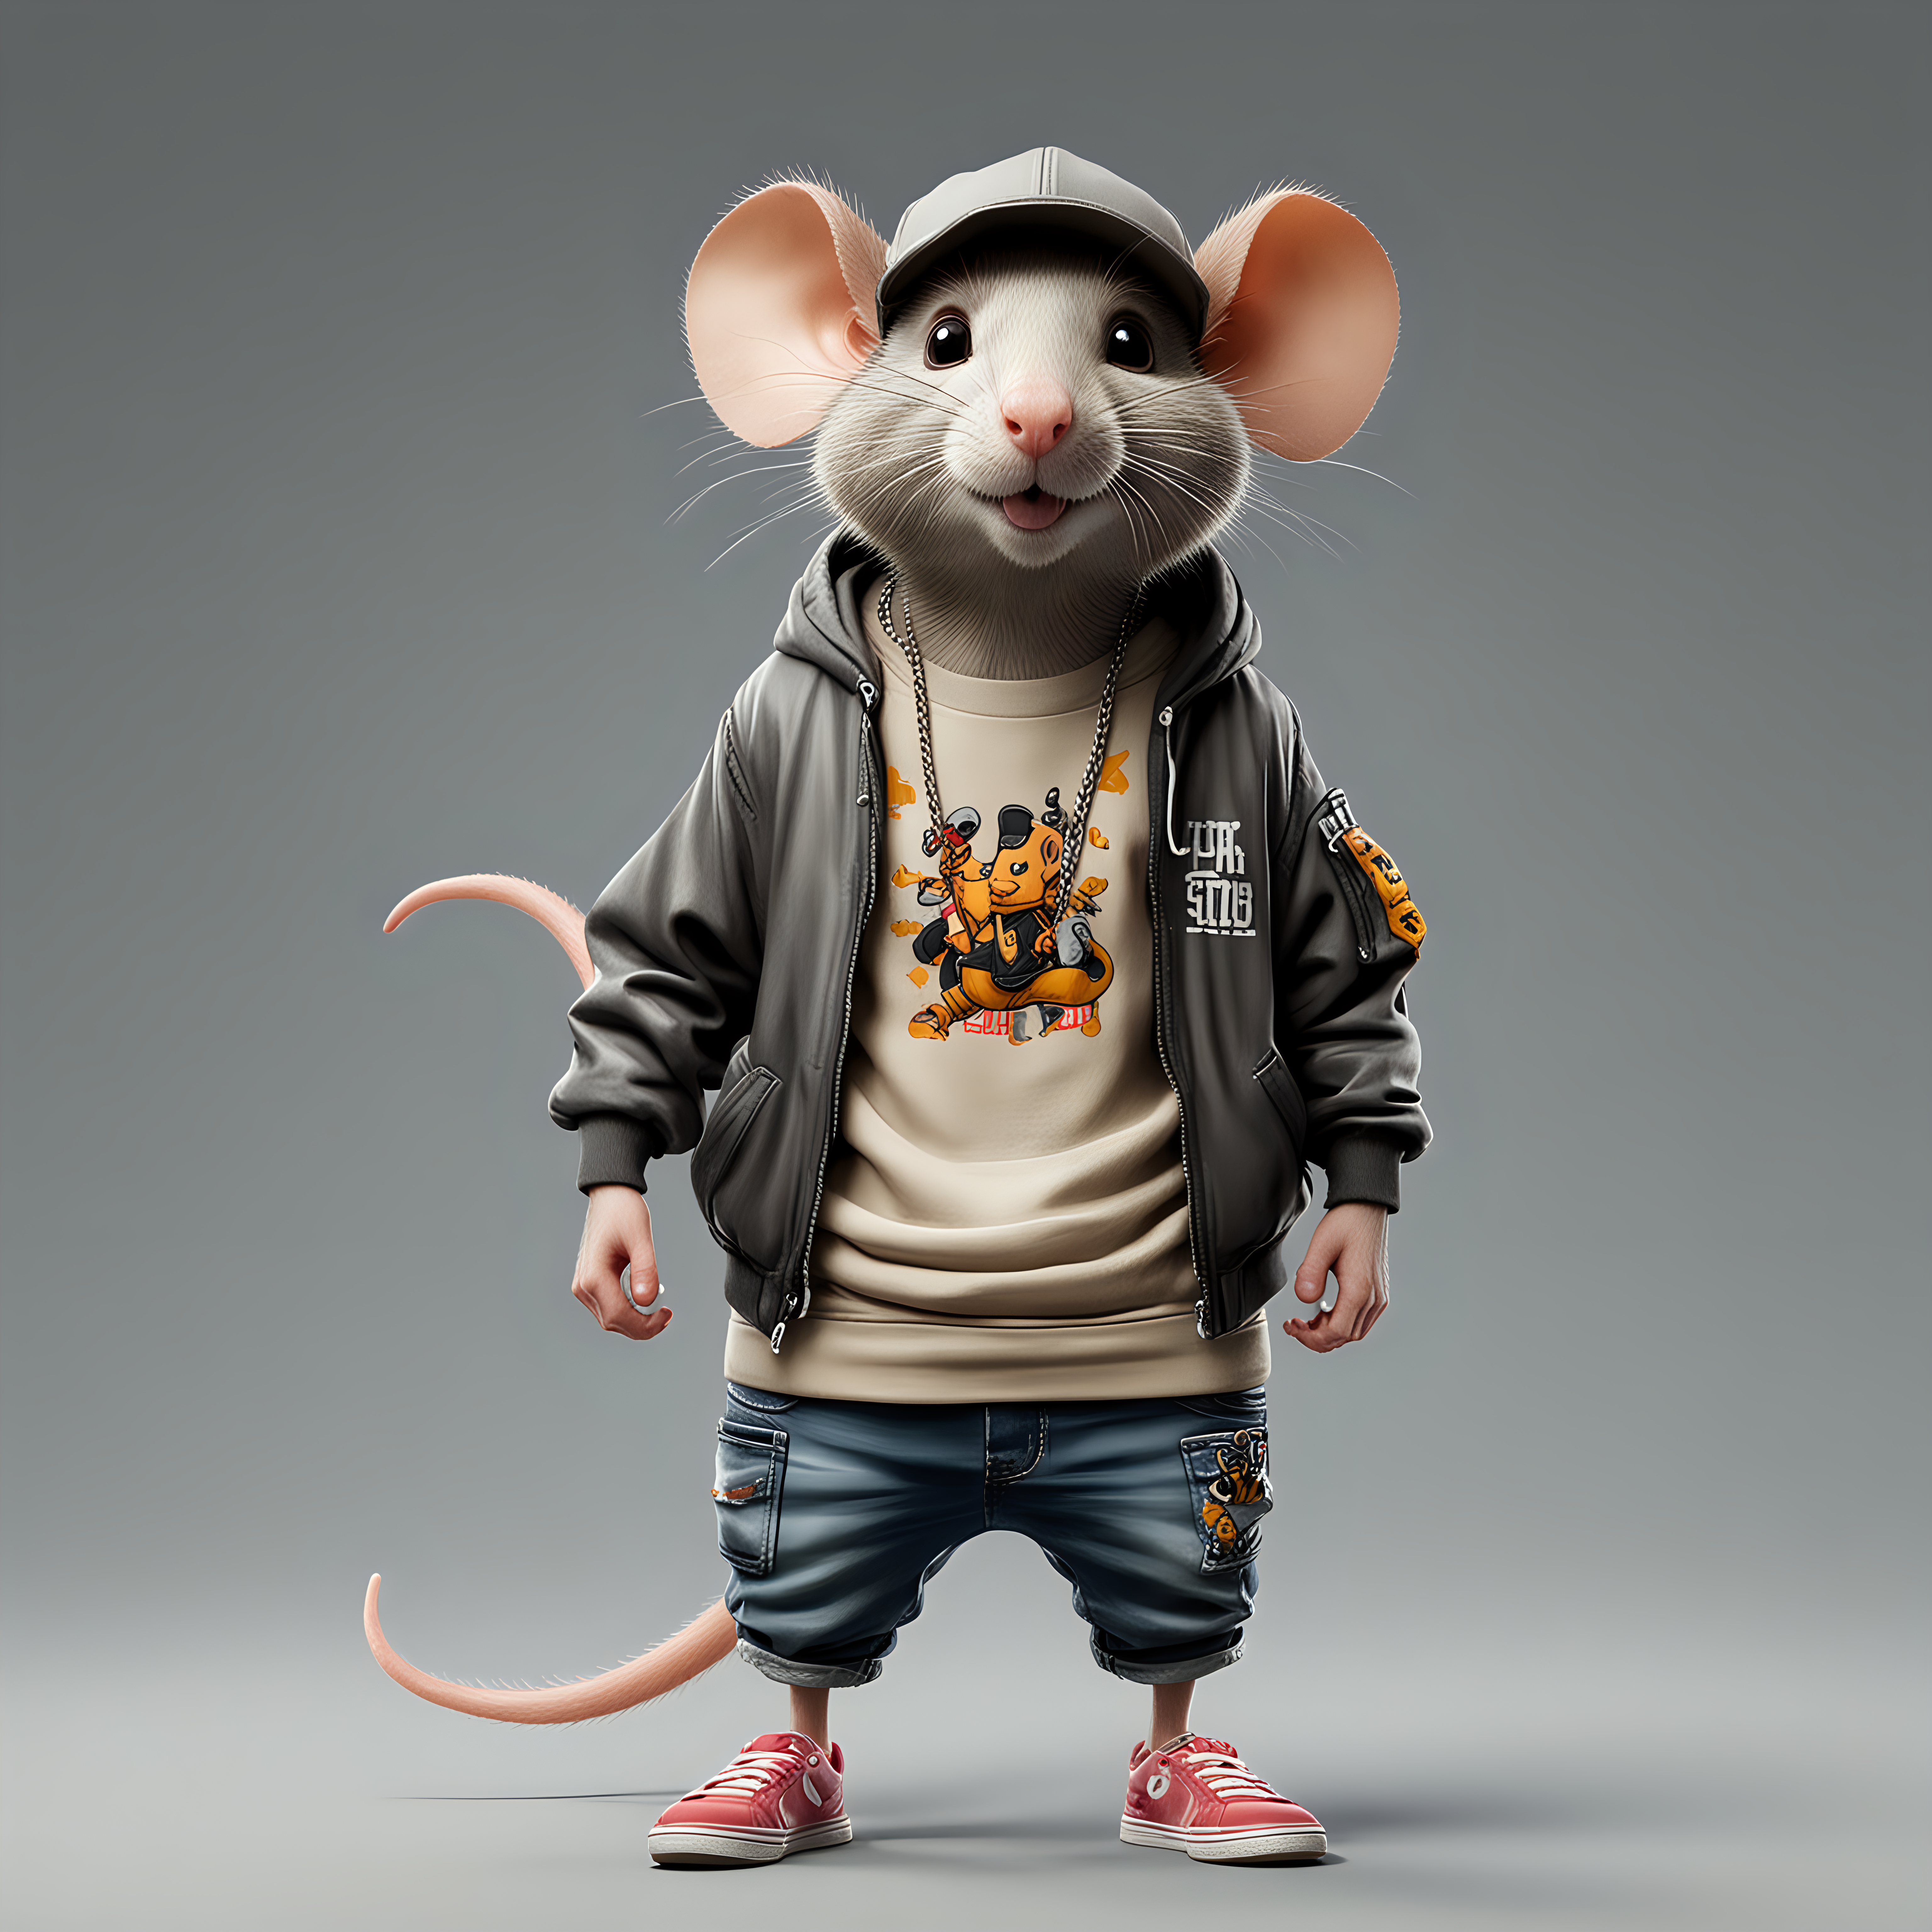 Hip Hop Rat Cartoon Character in Stylish Outfit